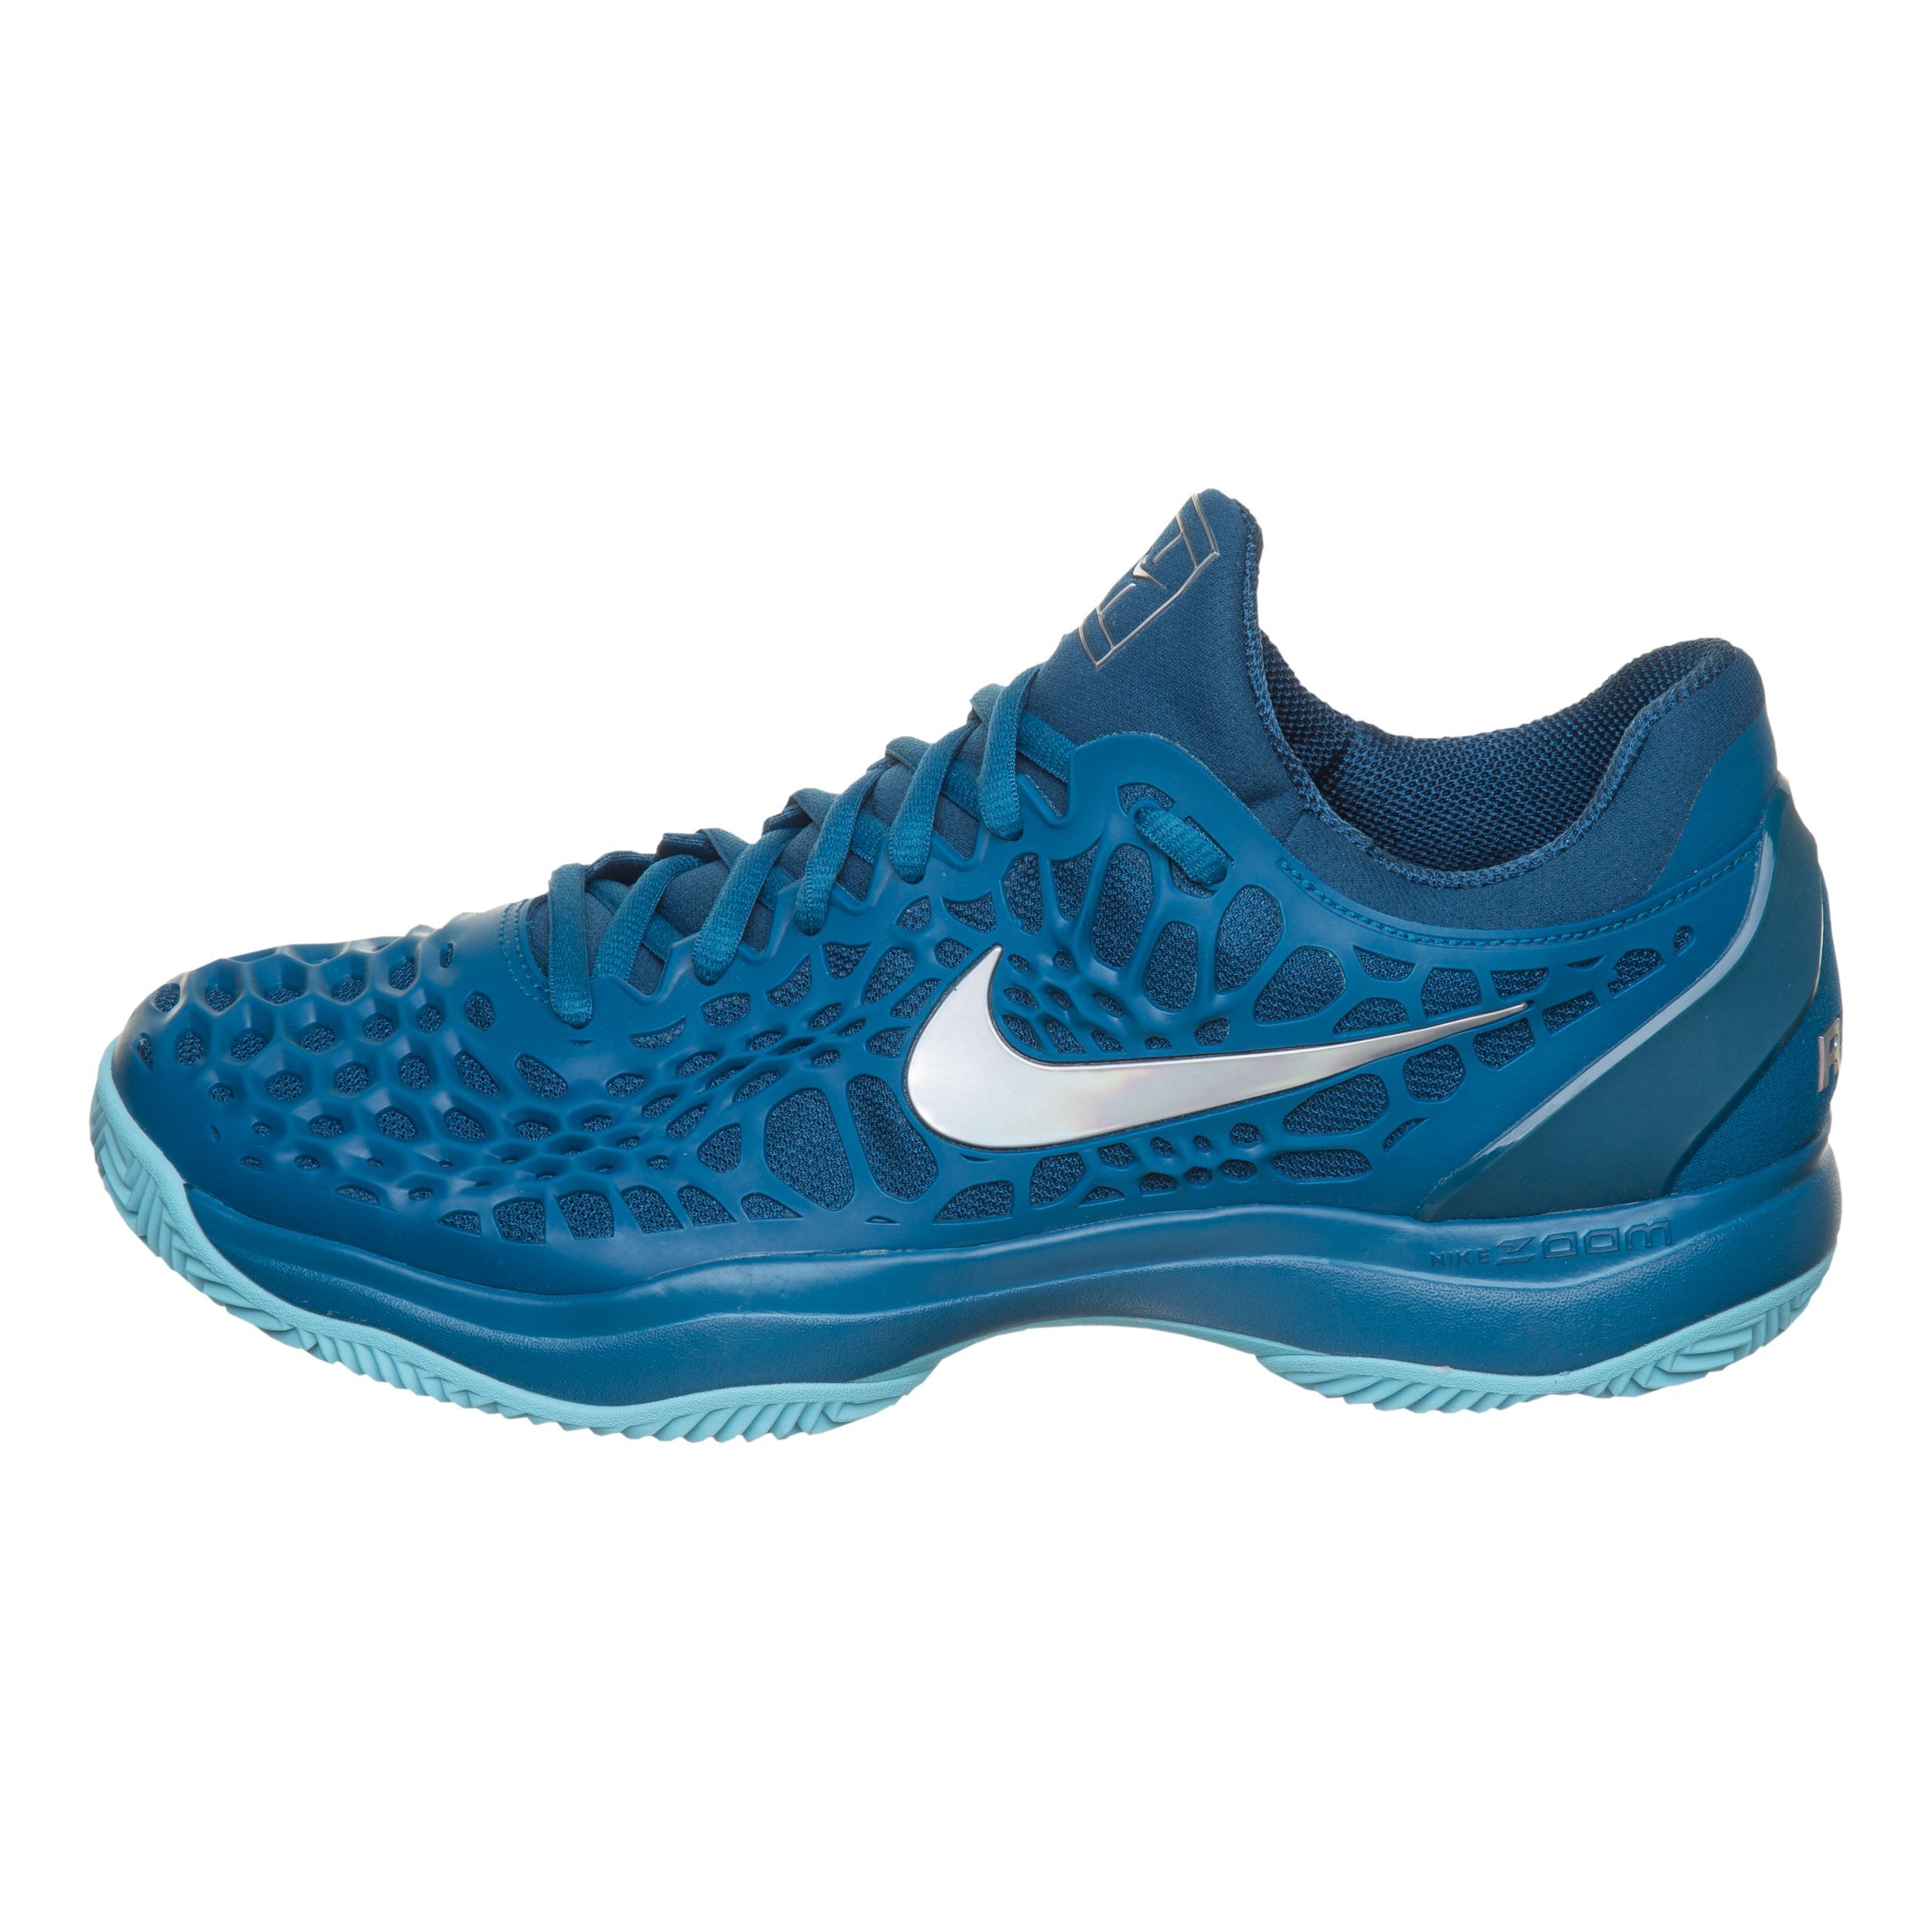 chaussure nike zoom cage 3 يد بلاي ستيشن